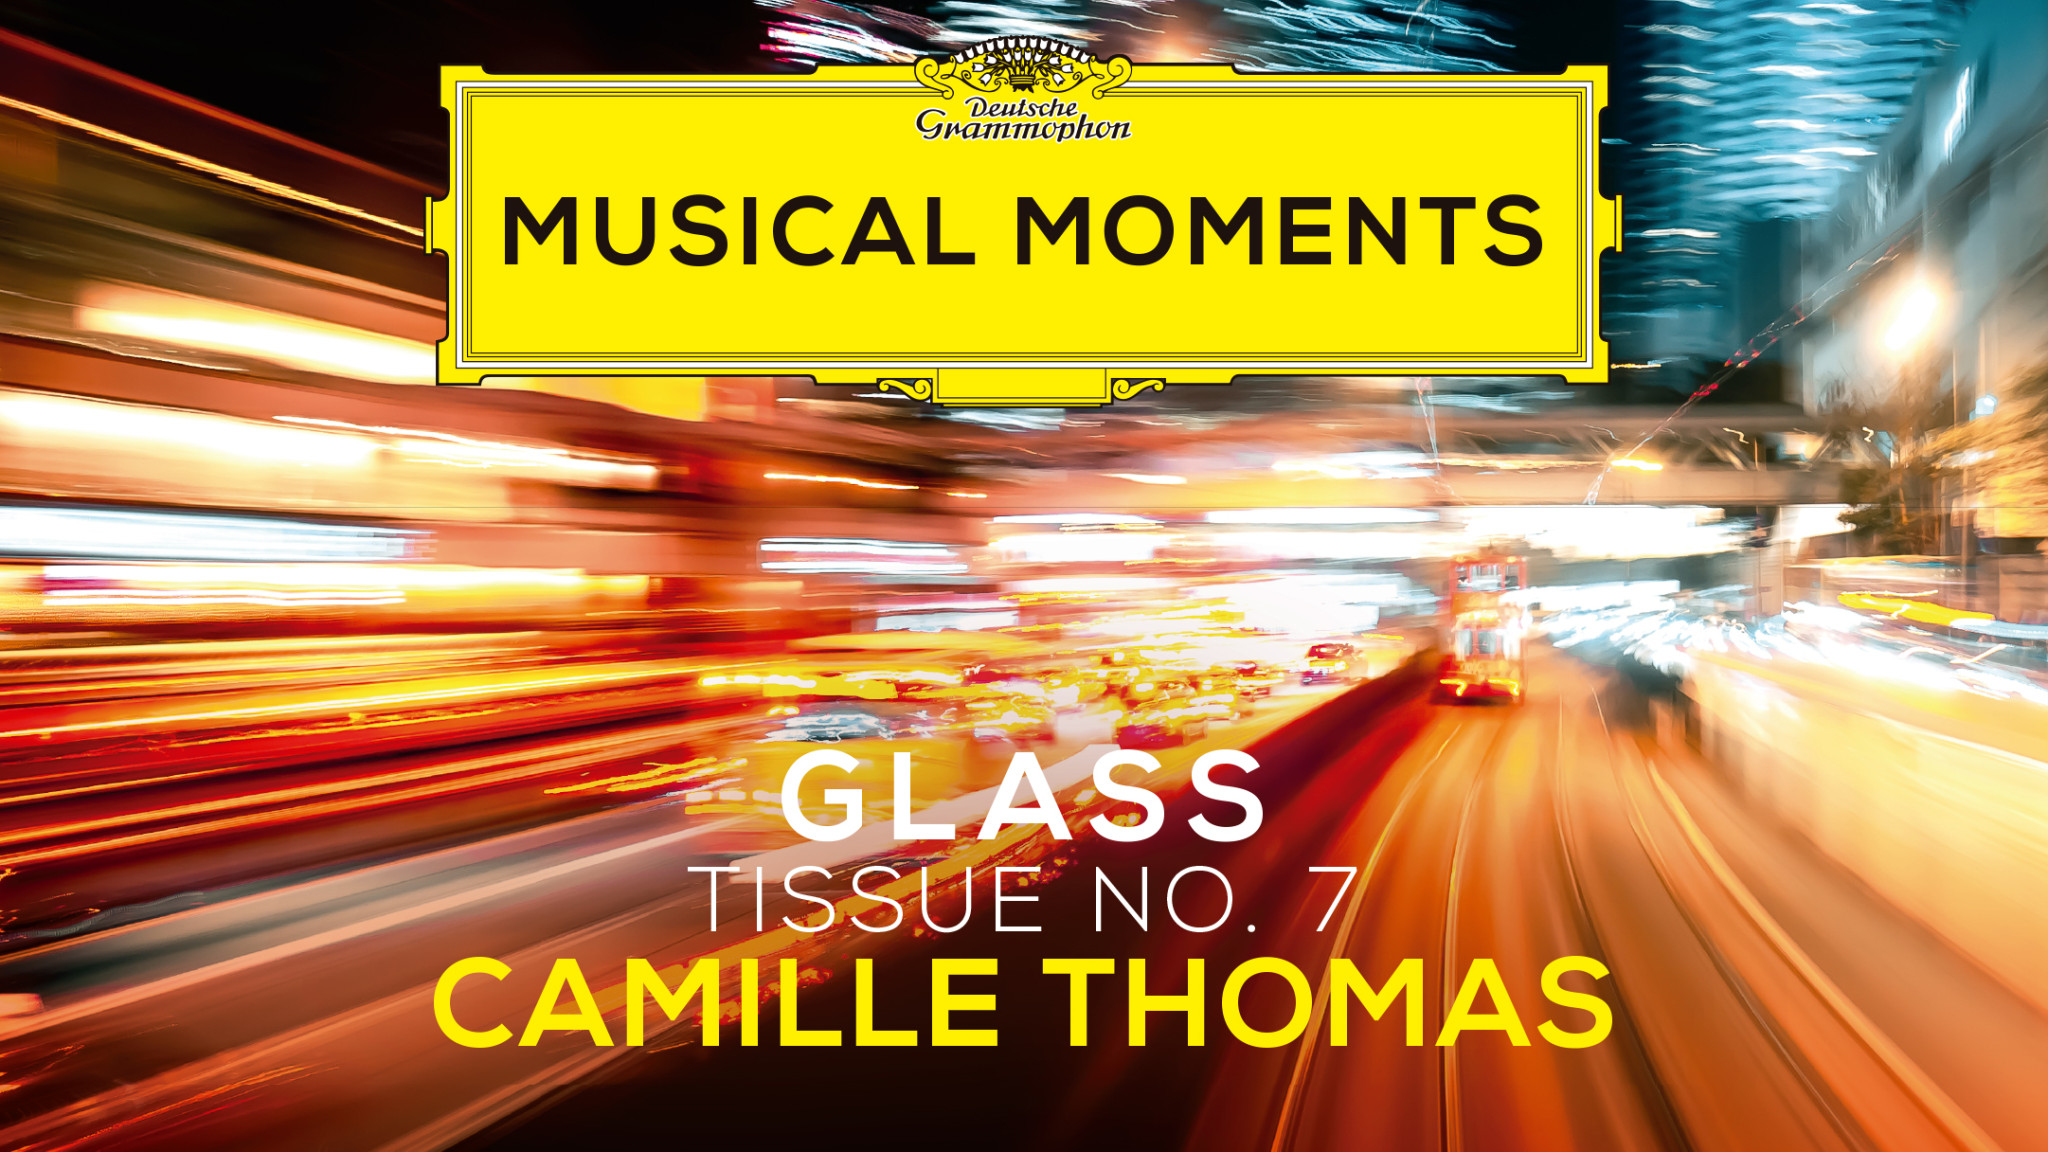 Musical Moments - Camille Thomas - Glass: Tissue No. 7